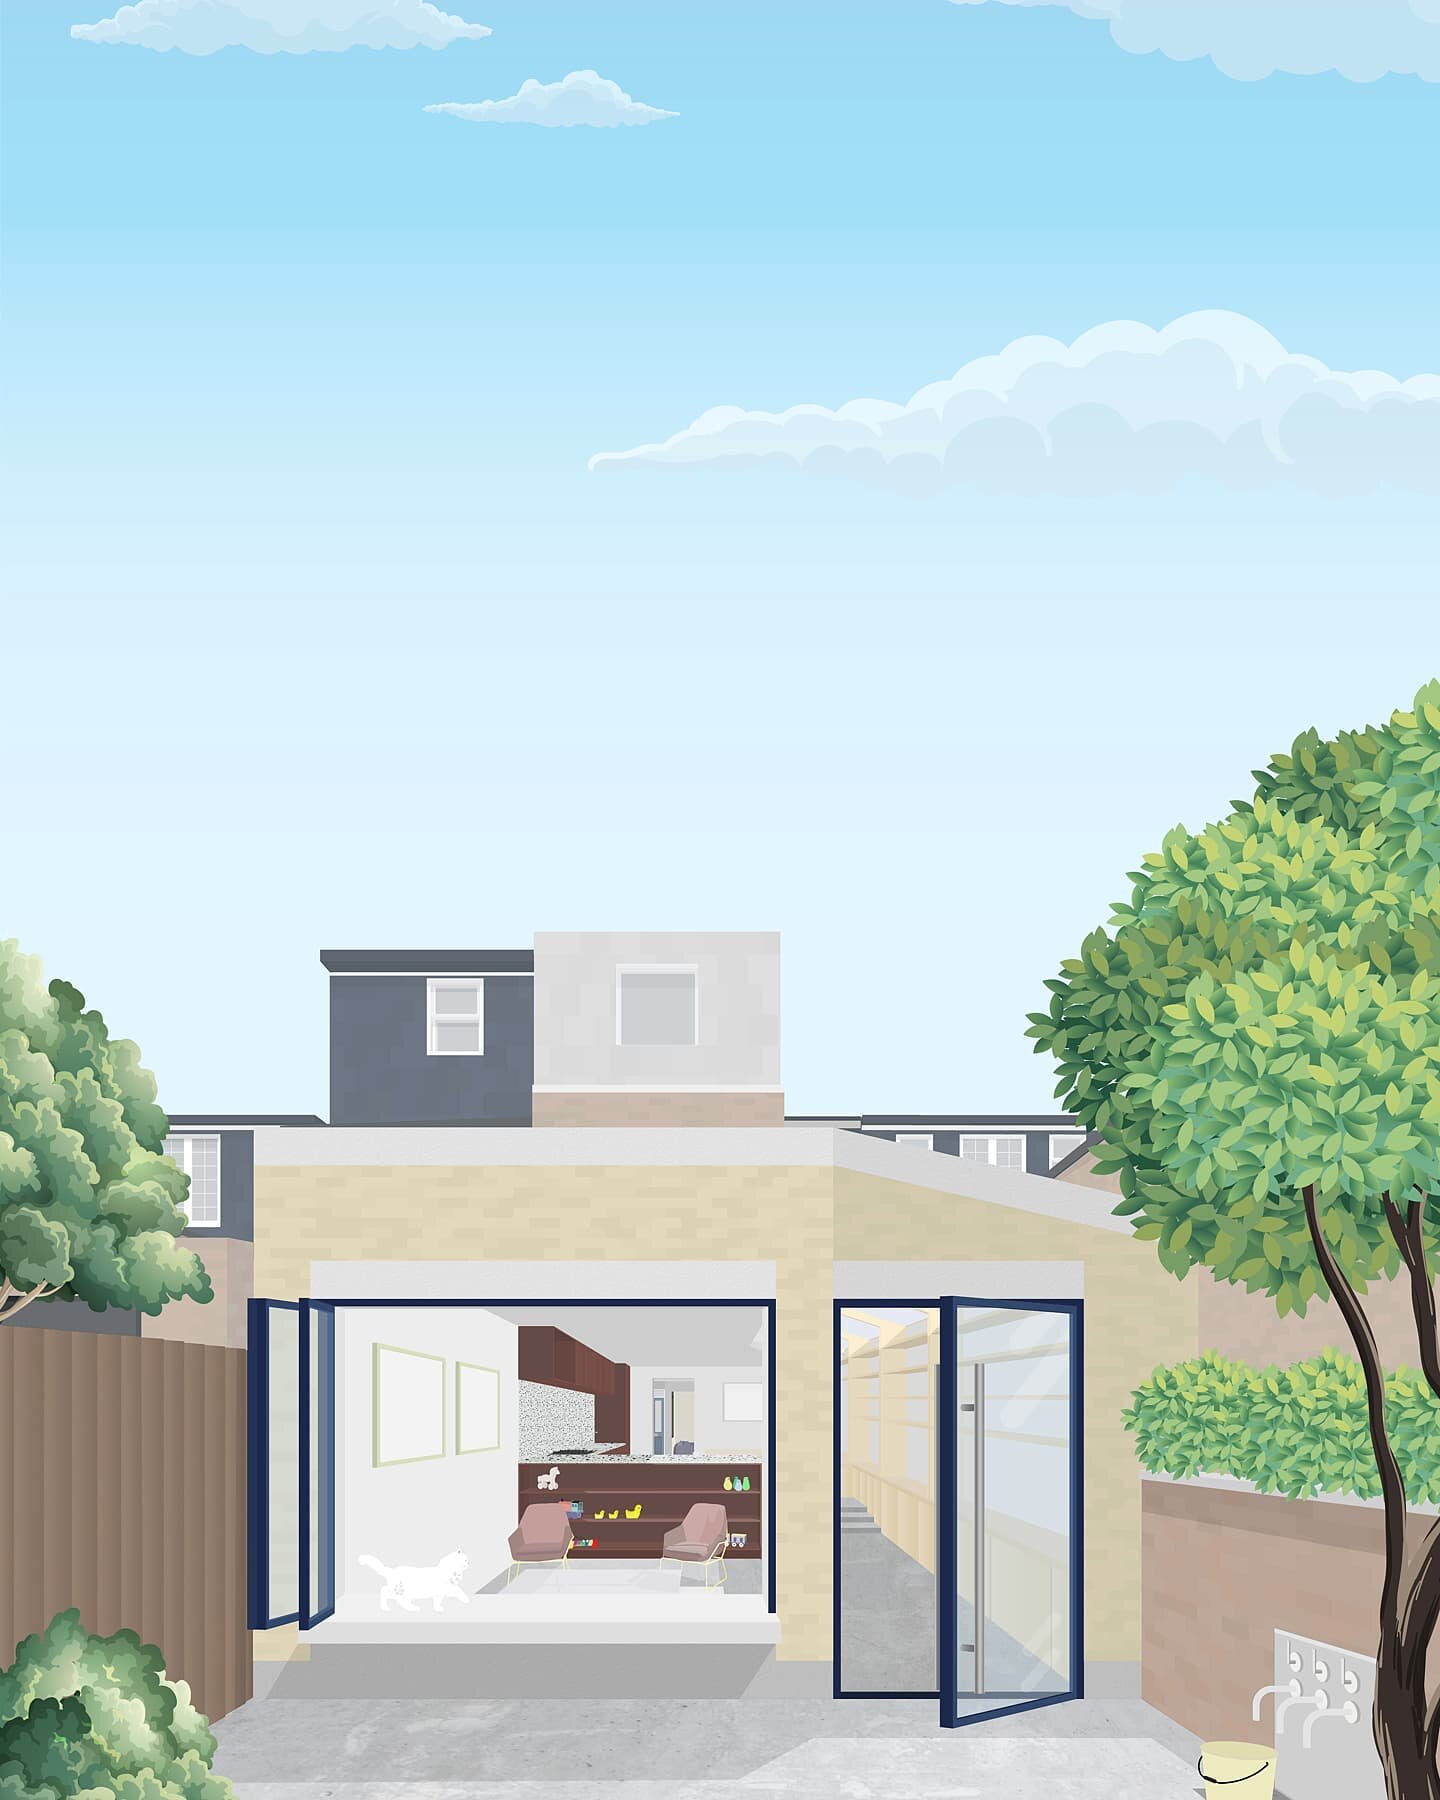 We have been developing this rear extension to a terraced property in Teddington. It features a bifolding window which can be opened up to extend the internal bench into the garden. The roof profile becomes an extrusion of the ceiling within.

#white